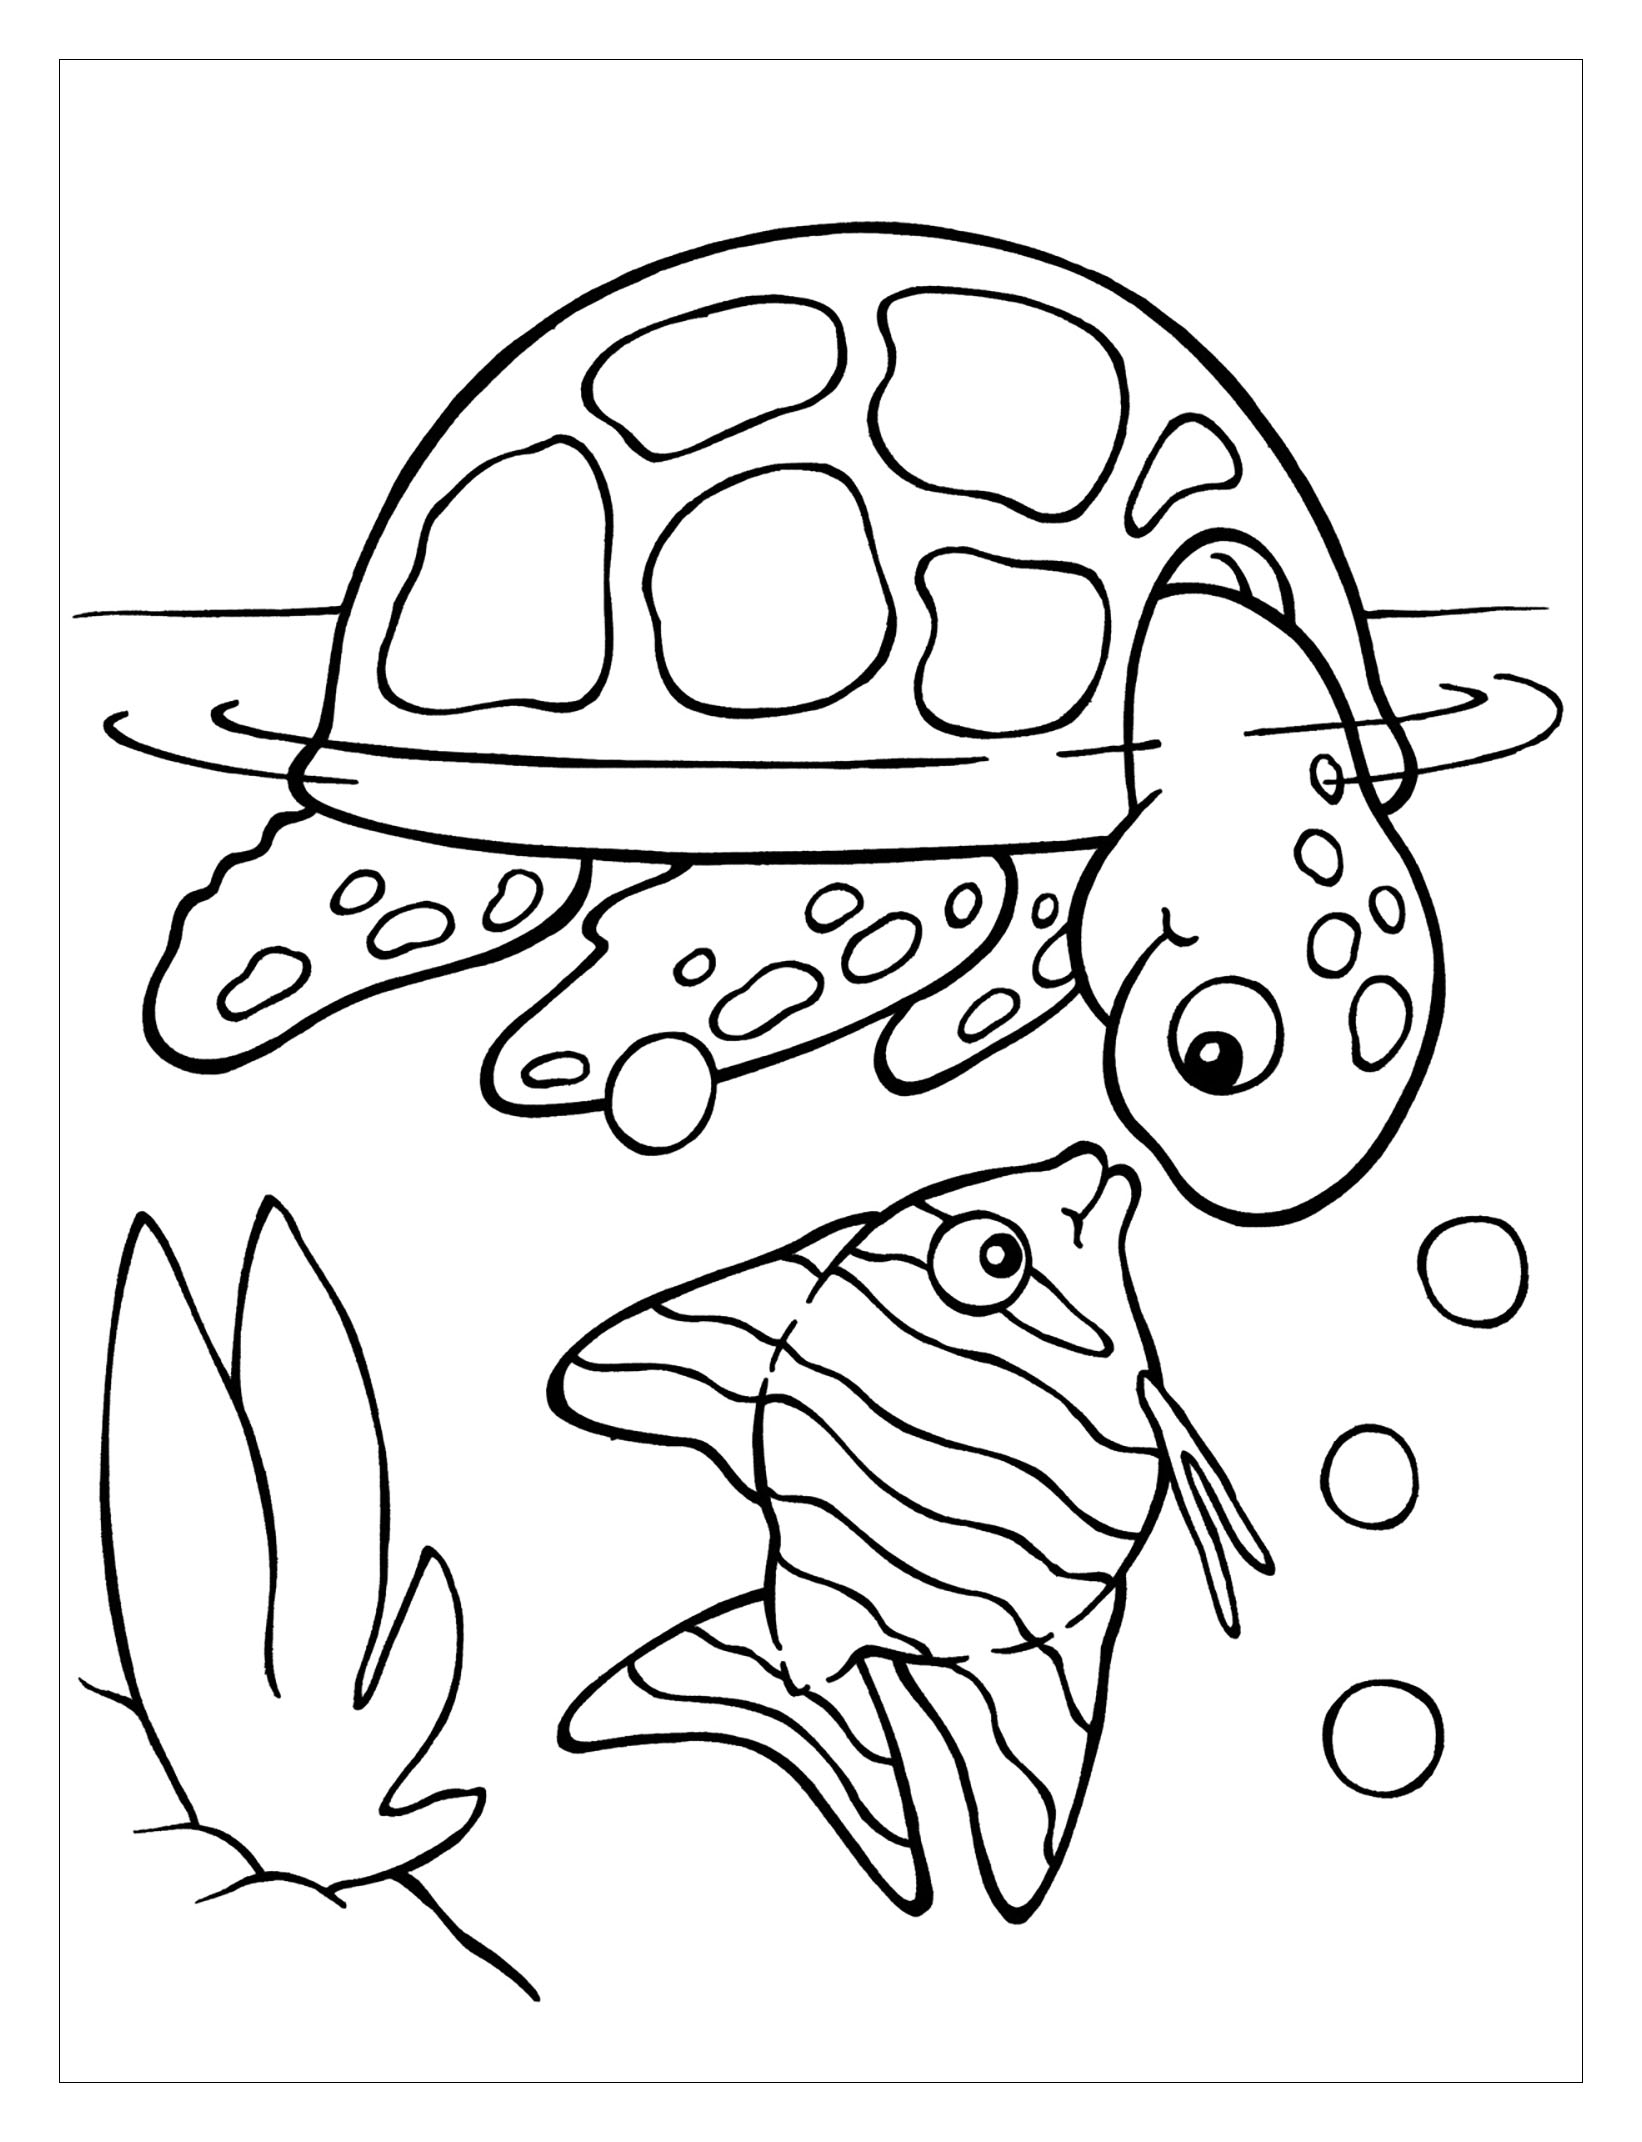 Turtle coloring pages for children - Turtles Kids Coloring Pages